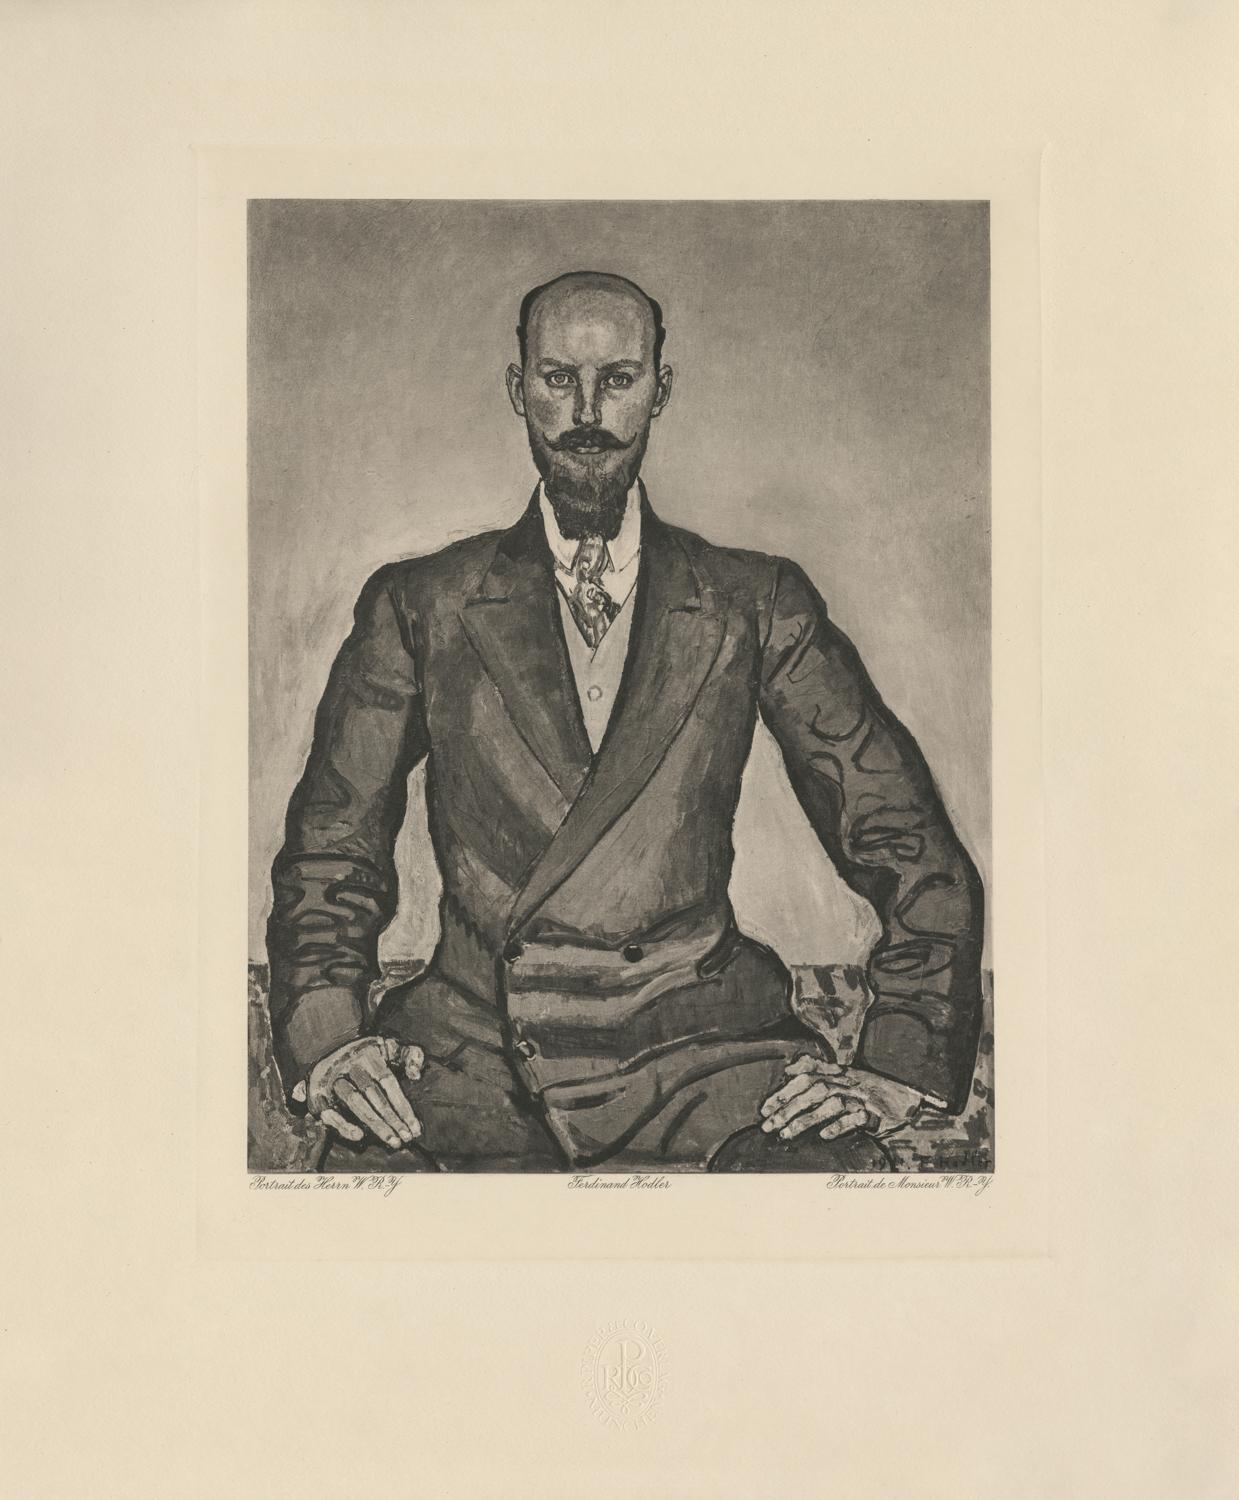 Ferdinand Hodler & R. Piper & Co. Figurative Print - "Portrait of Herrn Willy Russ-Young" Copper Plate Heliogravure